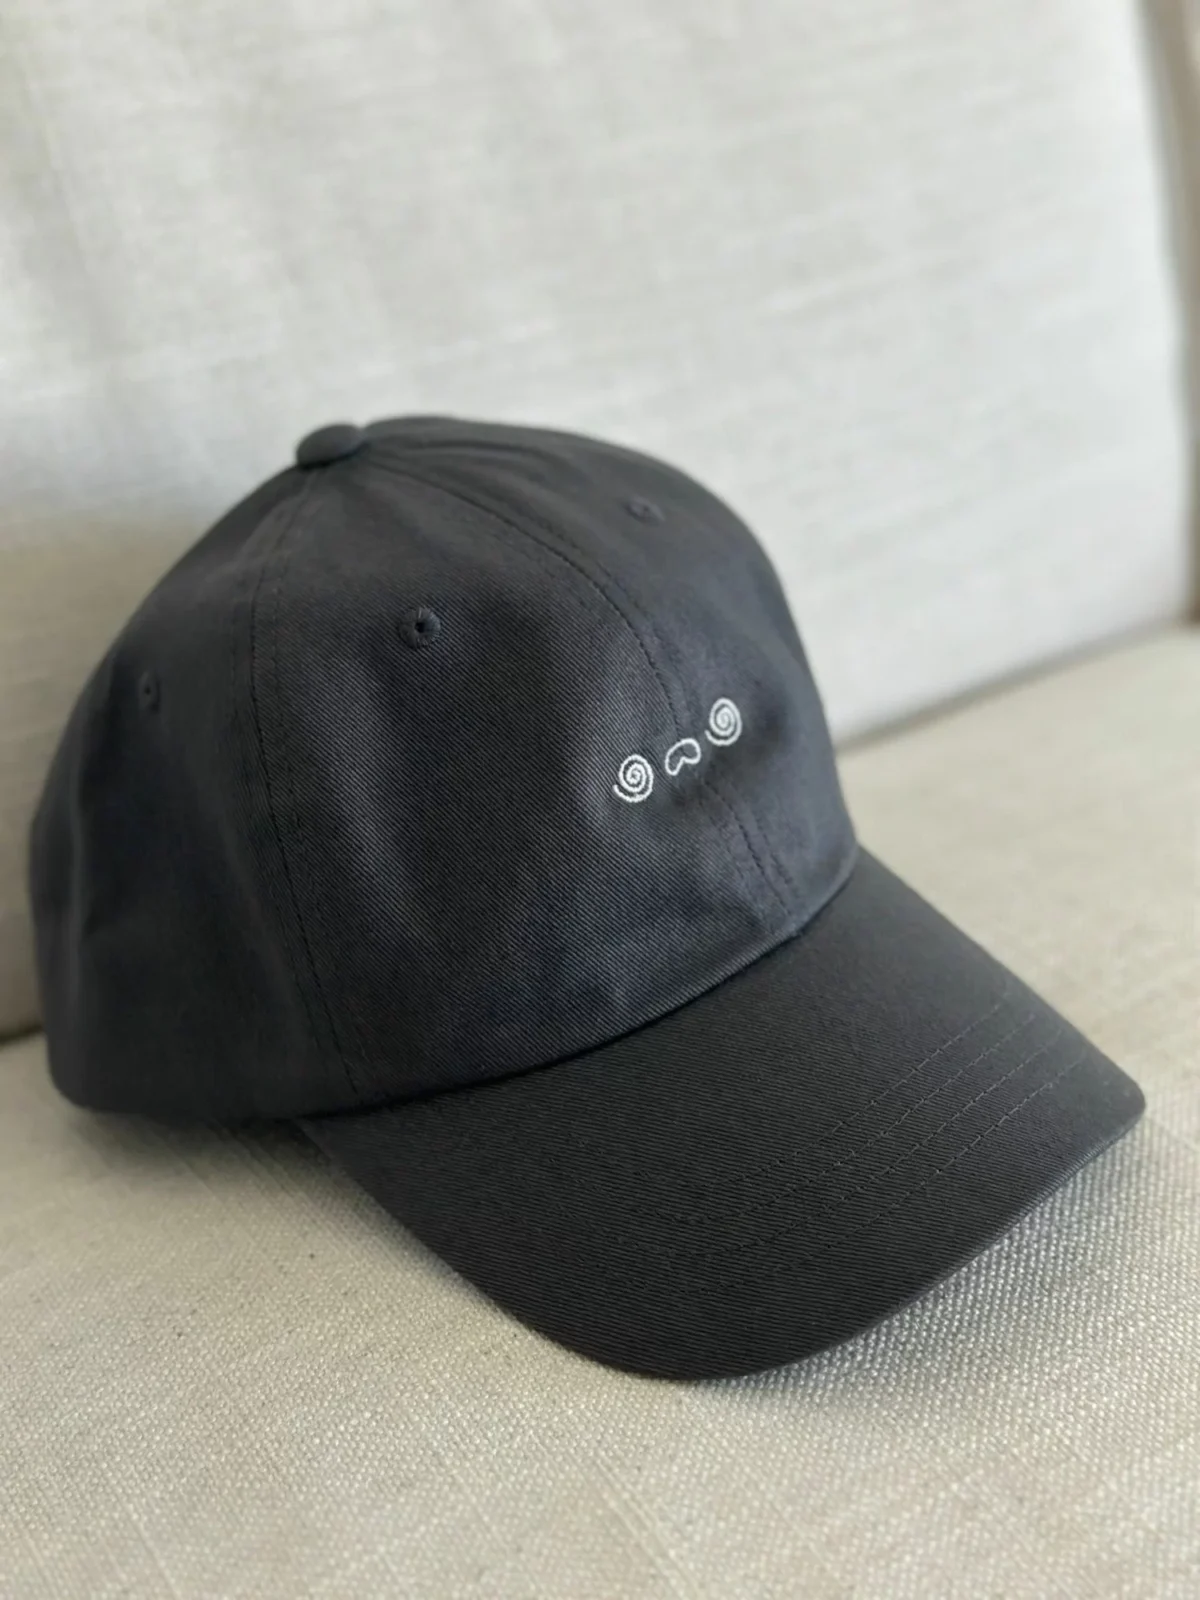 casquette broderie personnalisee client